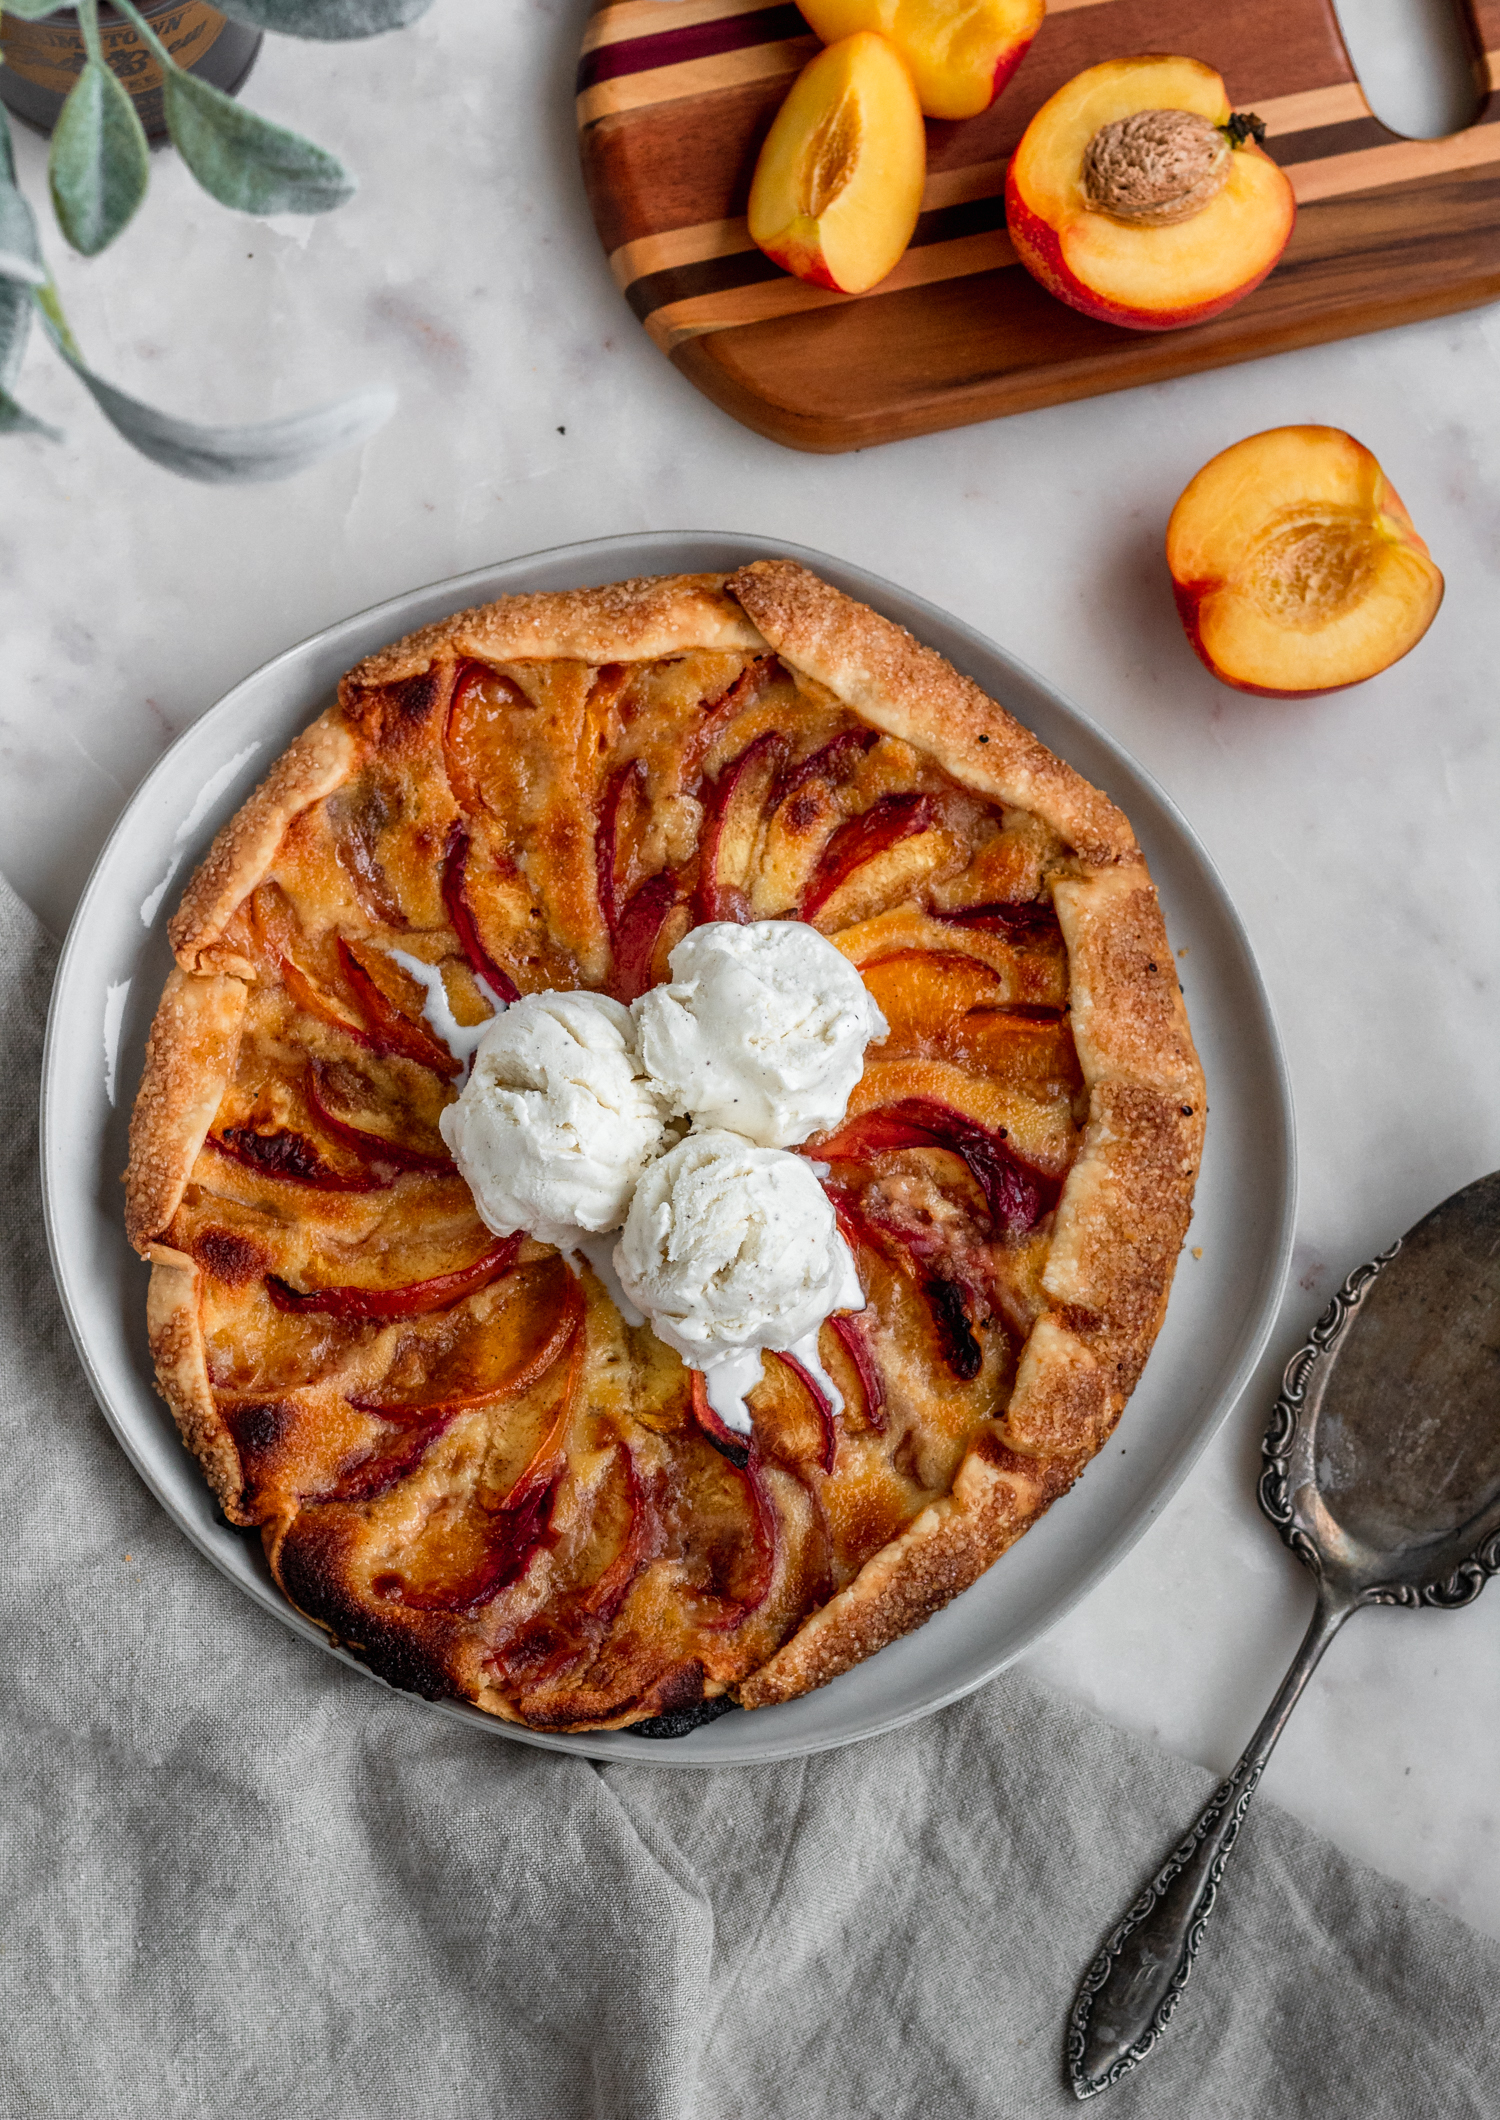 How to make a nectarine galette.